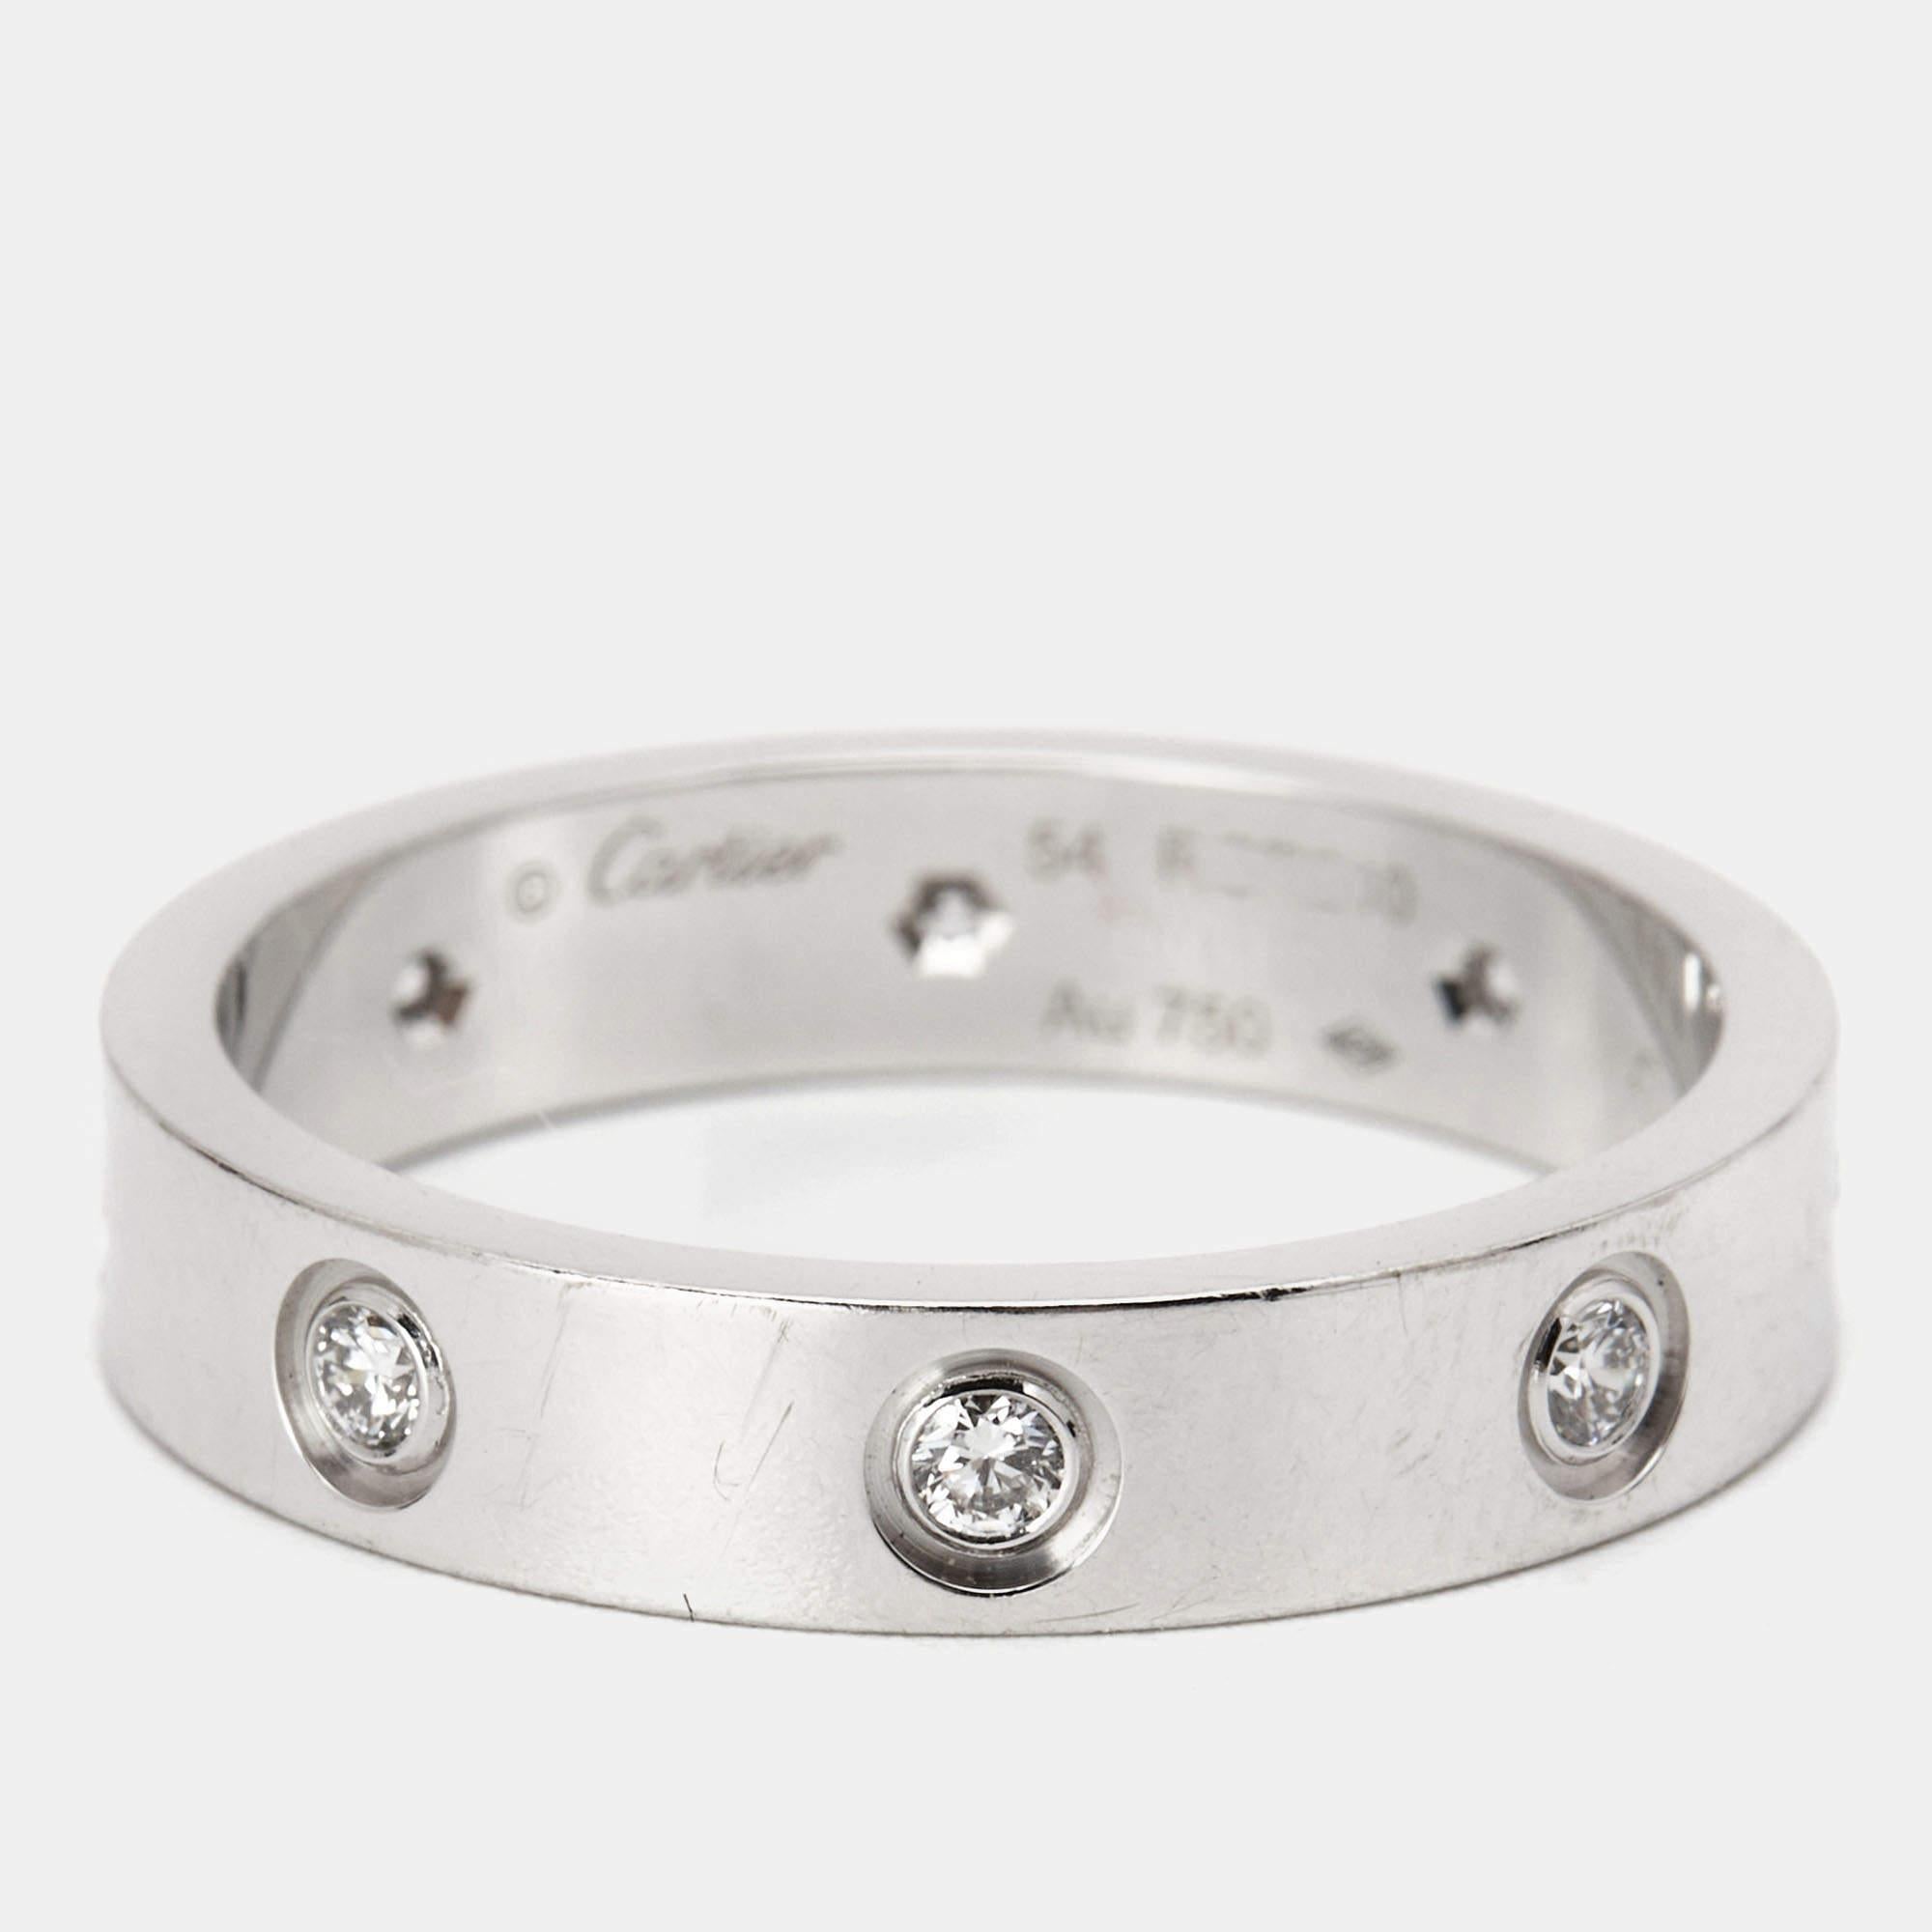 Contemporary Cartier Love 8 Diamonds 18k White Gold Ring Size 54